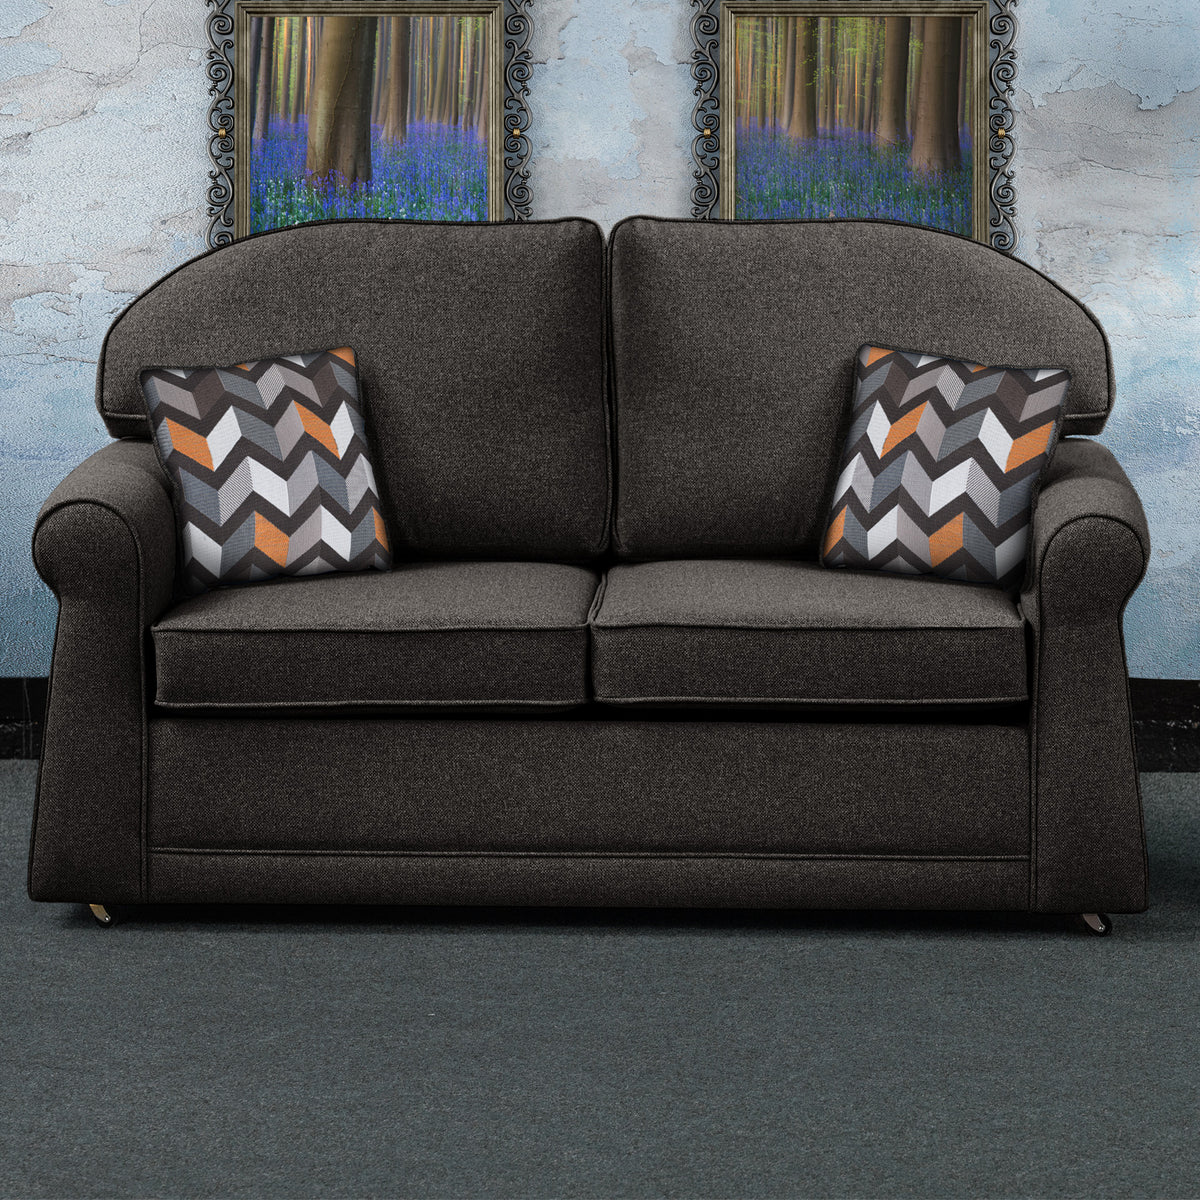 Croxdon Charcoal Faux Linen 2 Seater Sofabed with Charcoal Scatter Cushions from Roseland Furniture